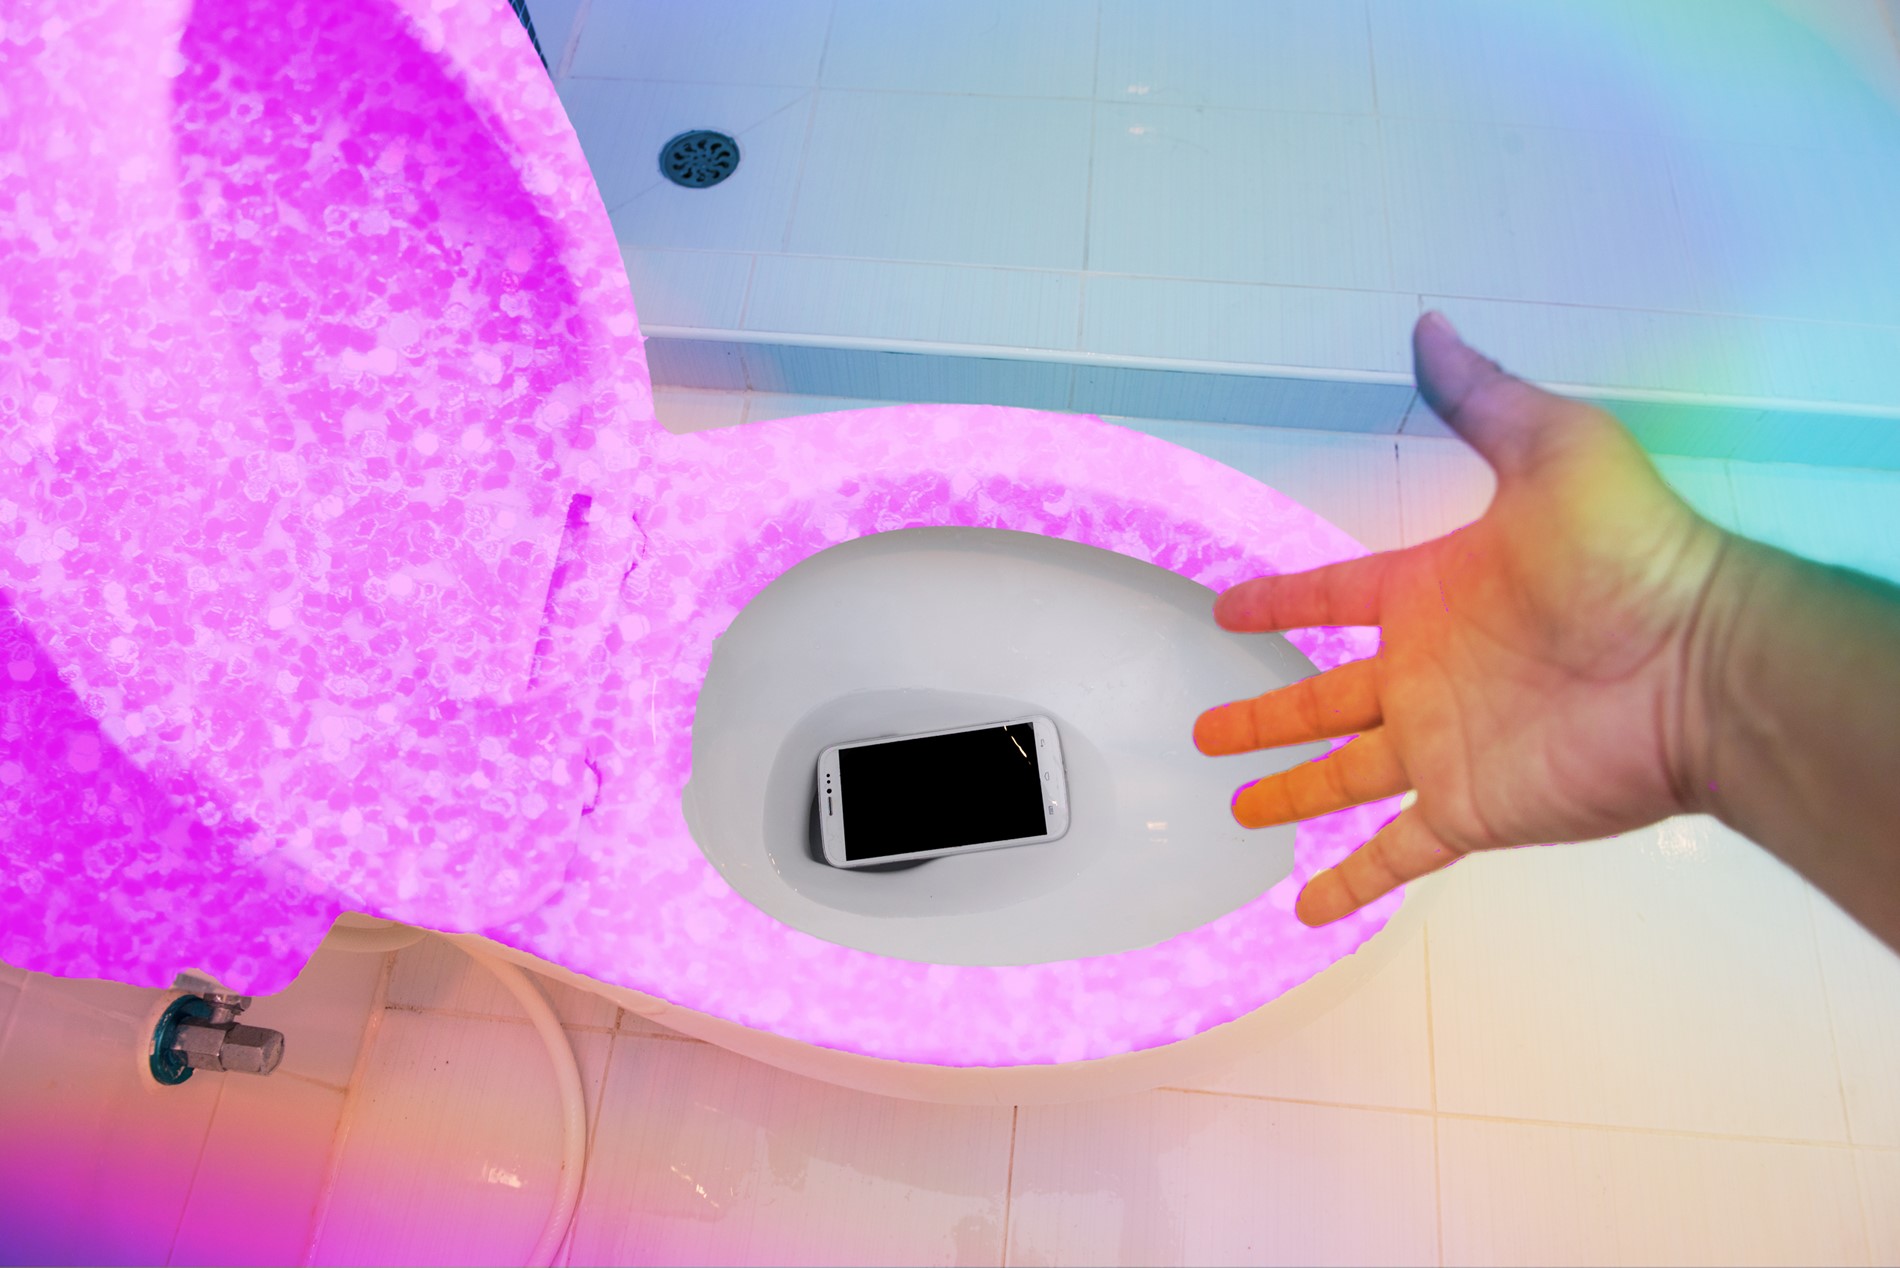 Dropping a phone in a pink toilet